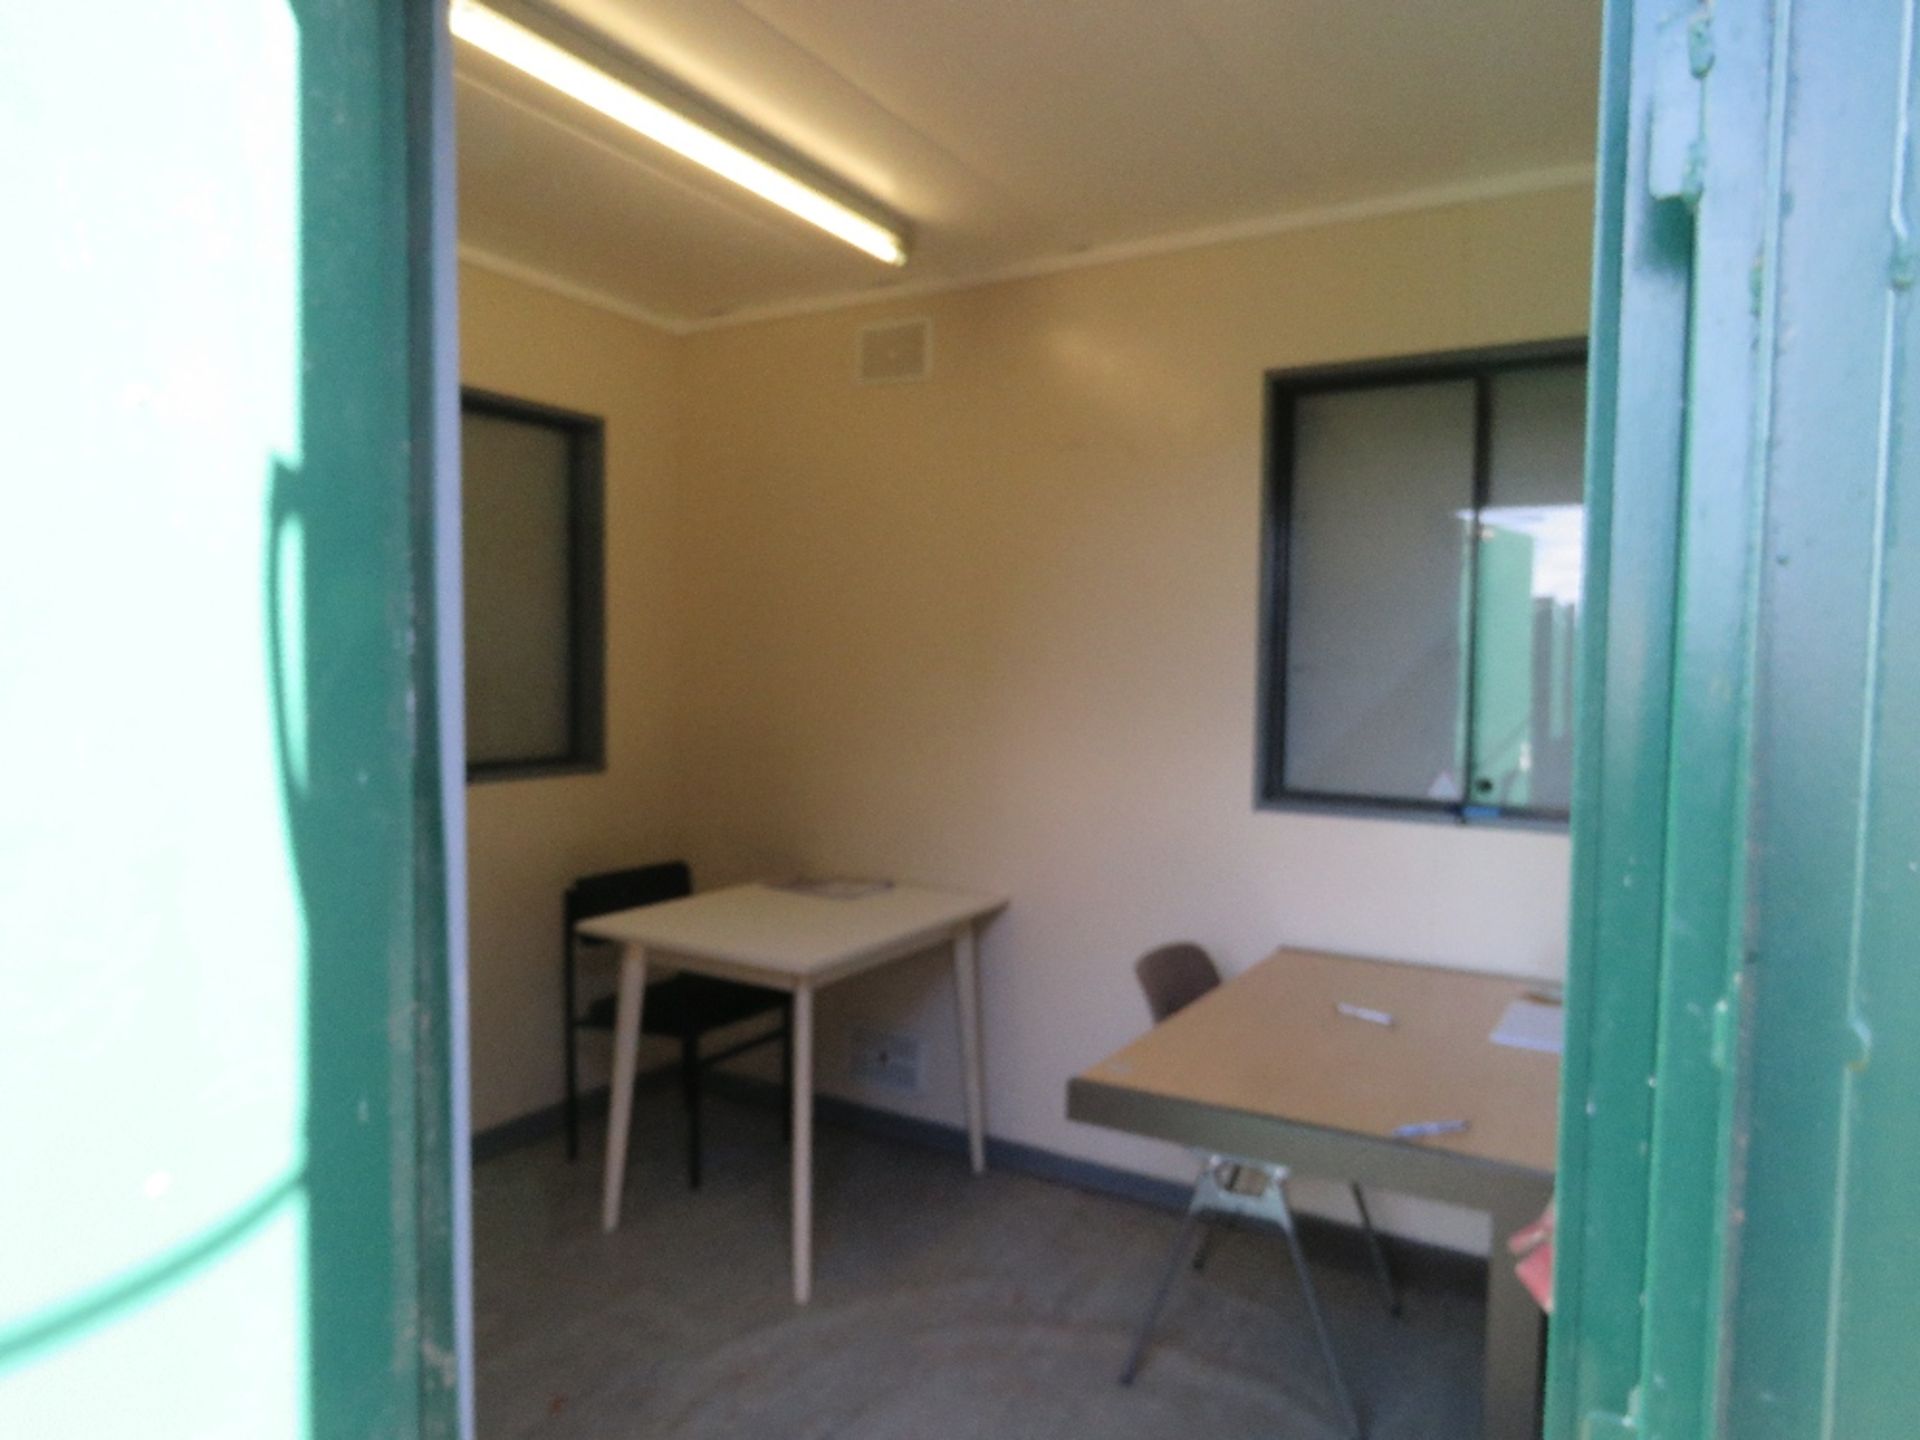 PORTABLE SITE OFFICE 24FT X 8FT APPROX OPEN PLAN AS SHOWN.. INCLUDES SOME FURNITURE. BEING SOLD ON B - Image 2 of 7